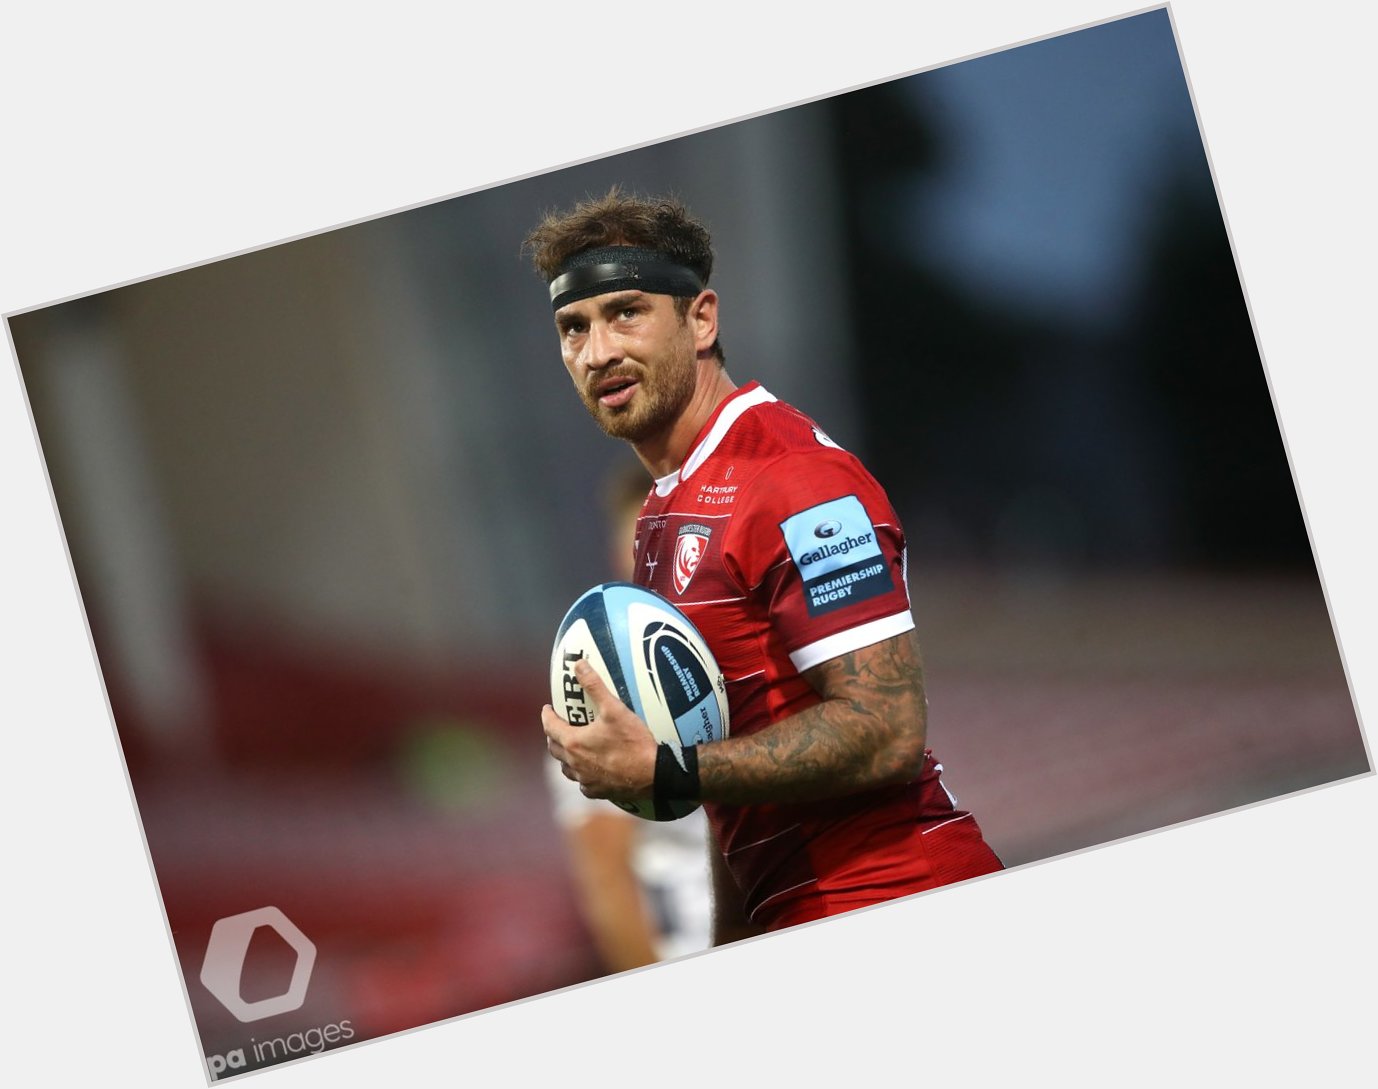 Happy birthday Danny Cipriani - the Gloucester fly-half is 33 today 